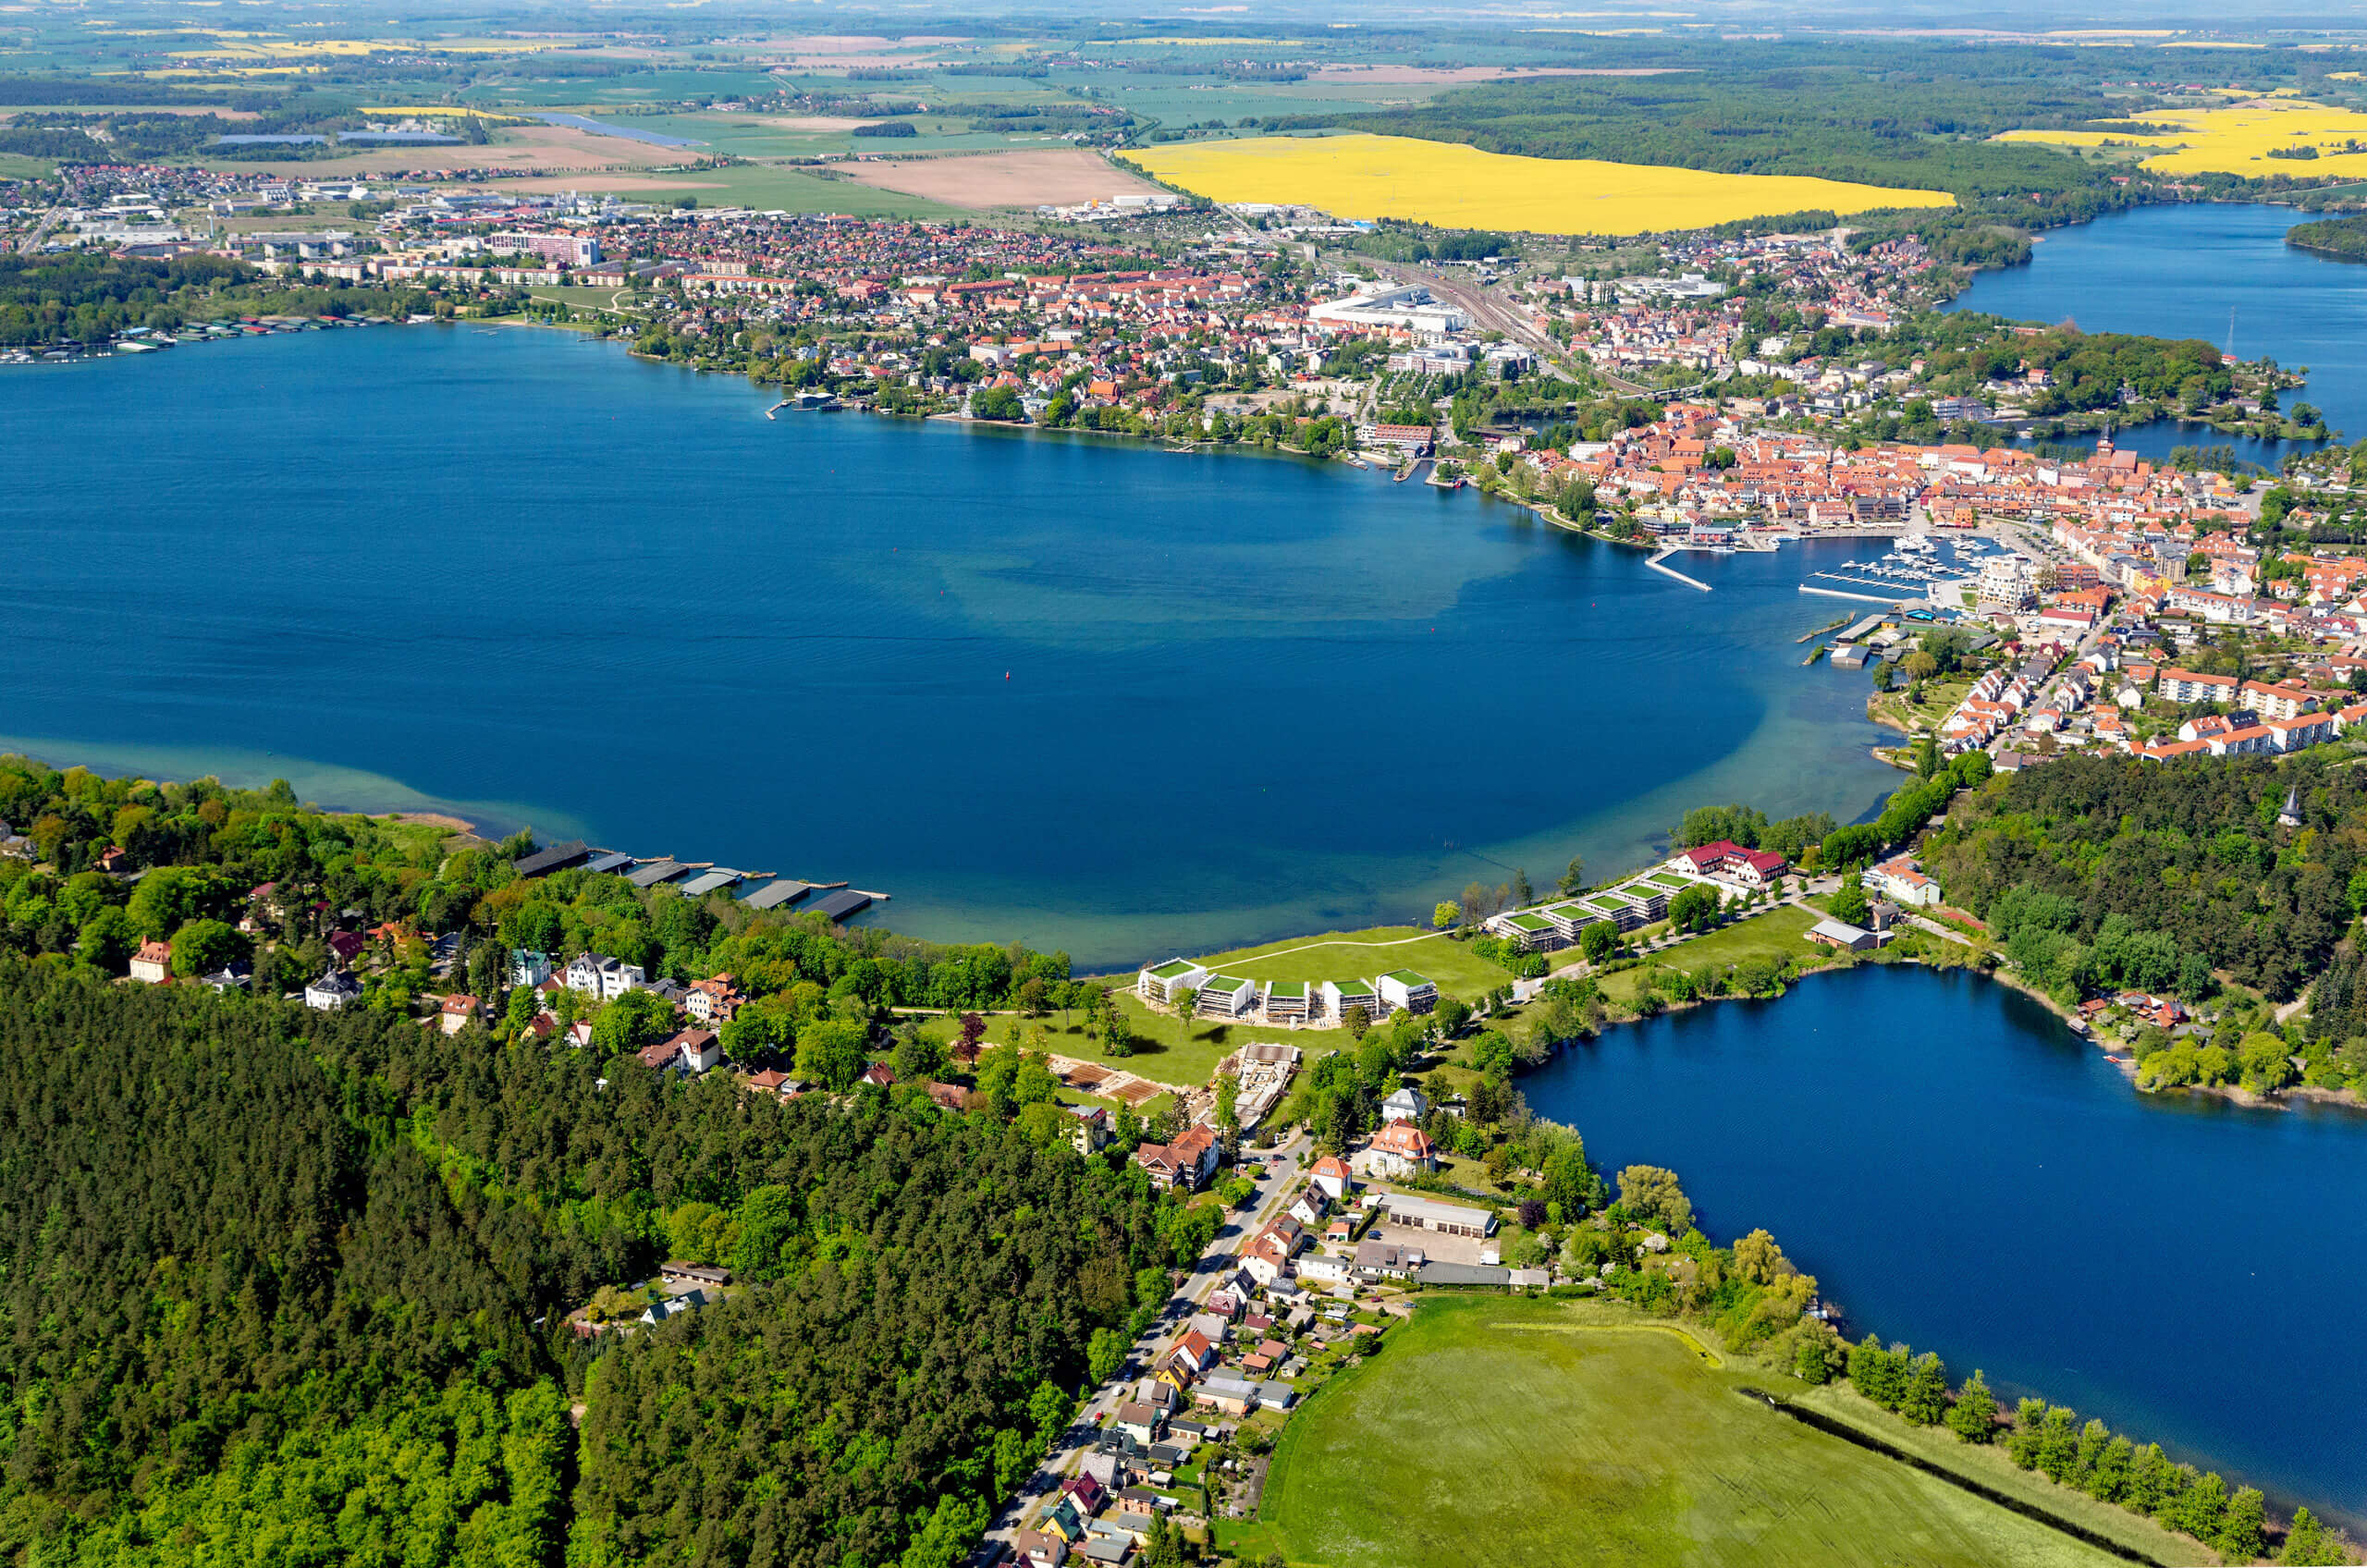 An aerial view of a city and a lake